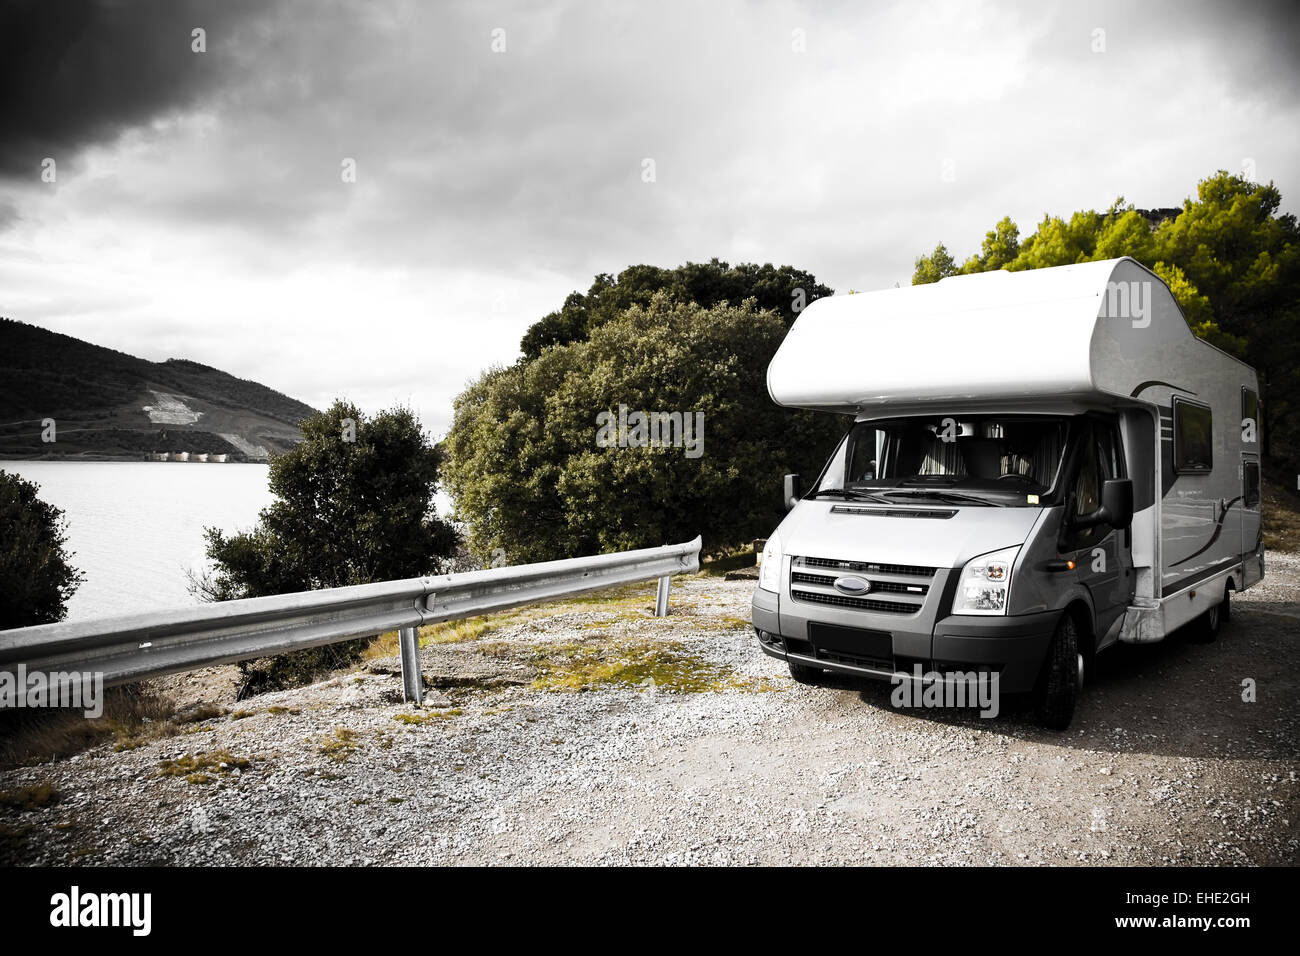 Motorhome On The Road Stock Photo